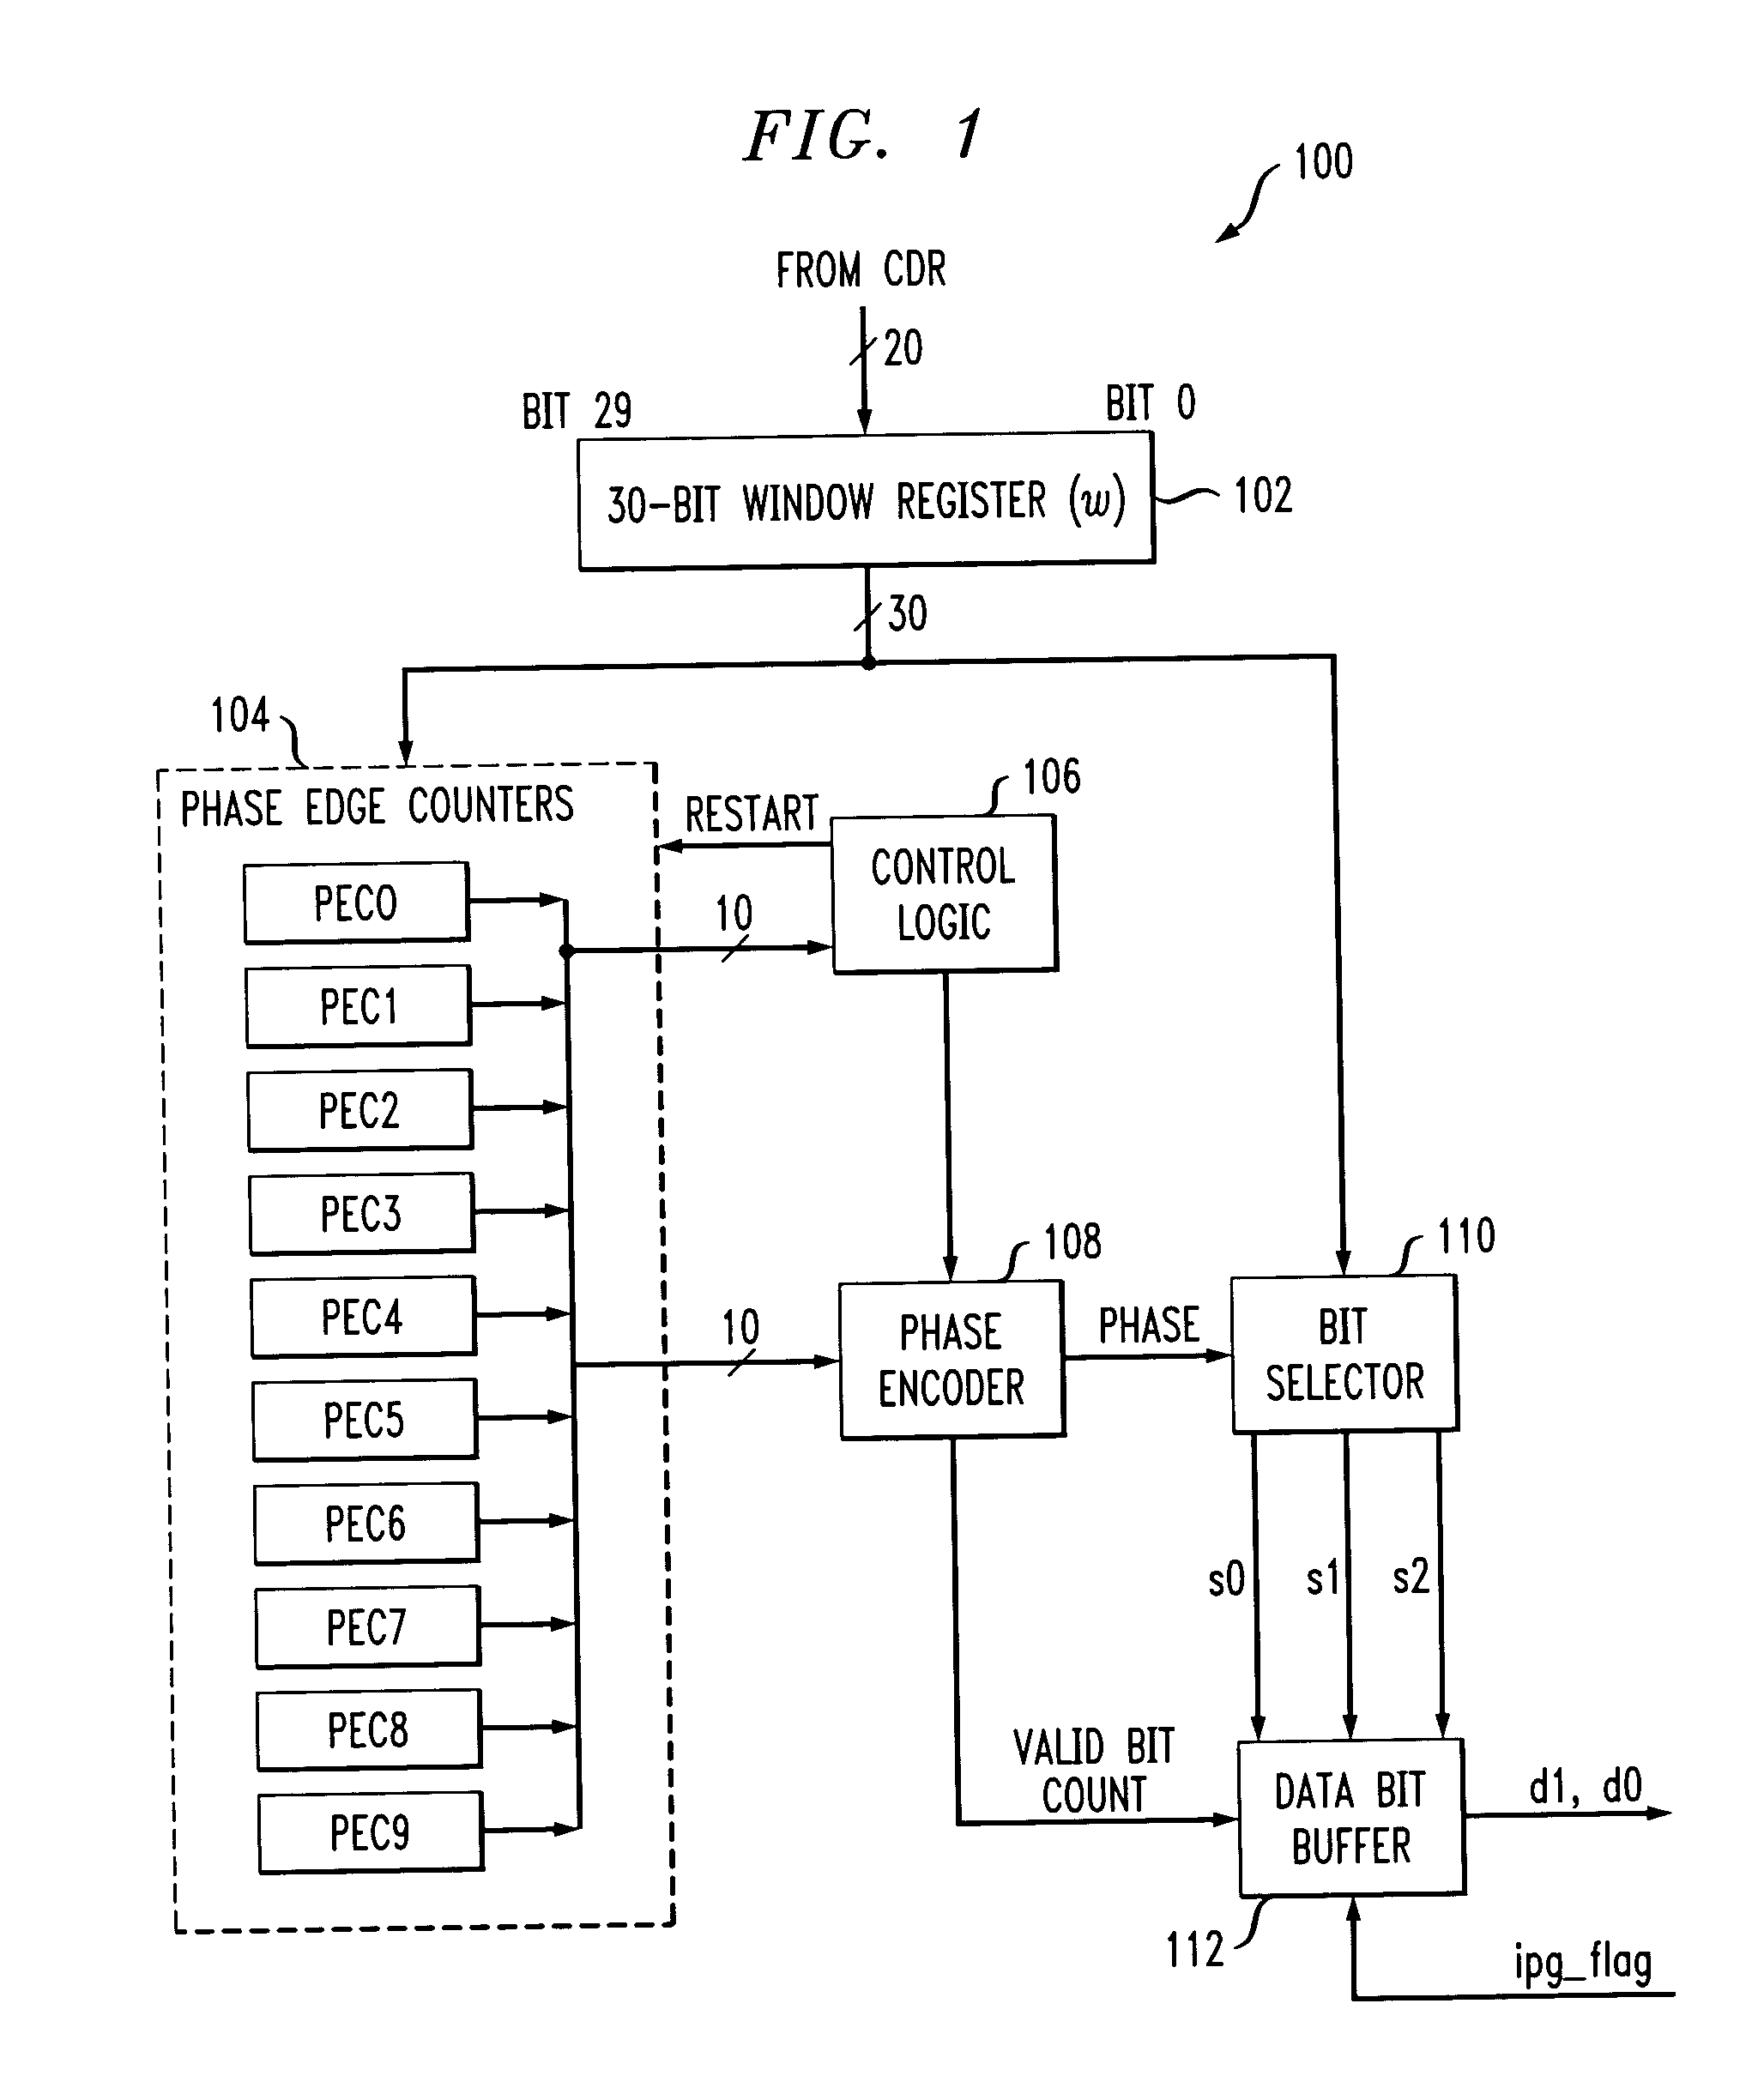 High-speed serial transceiver with sub-nominal rate operating mode